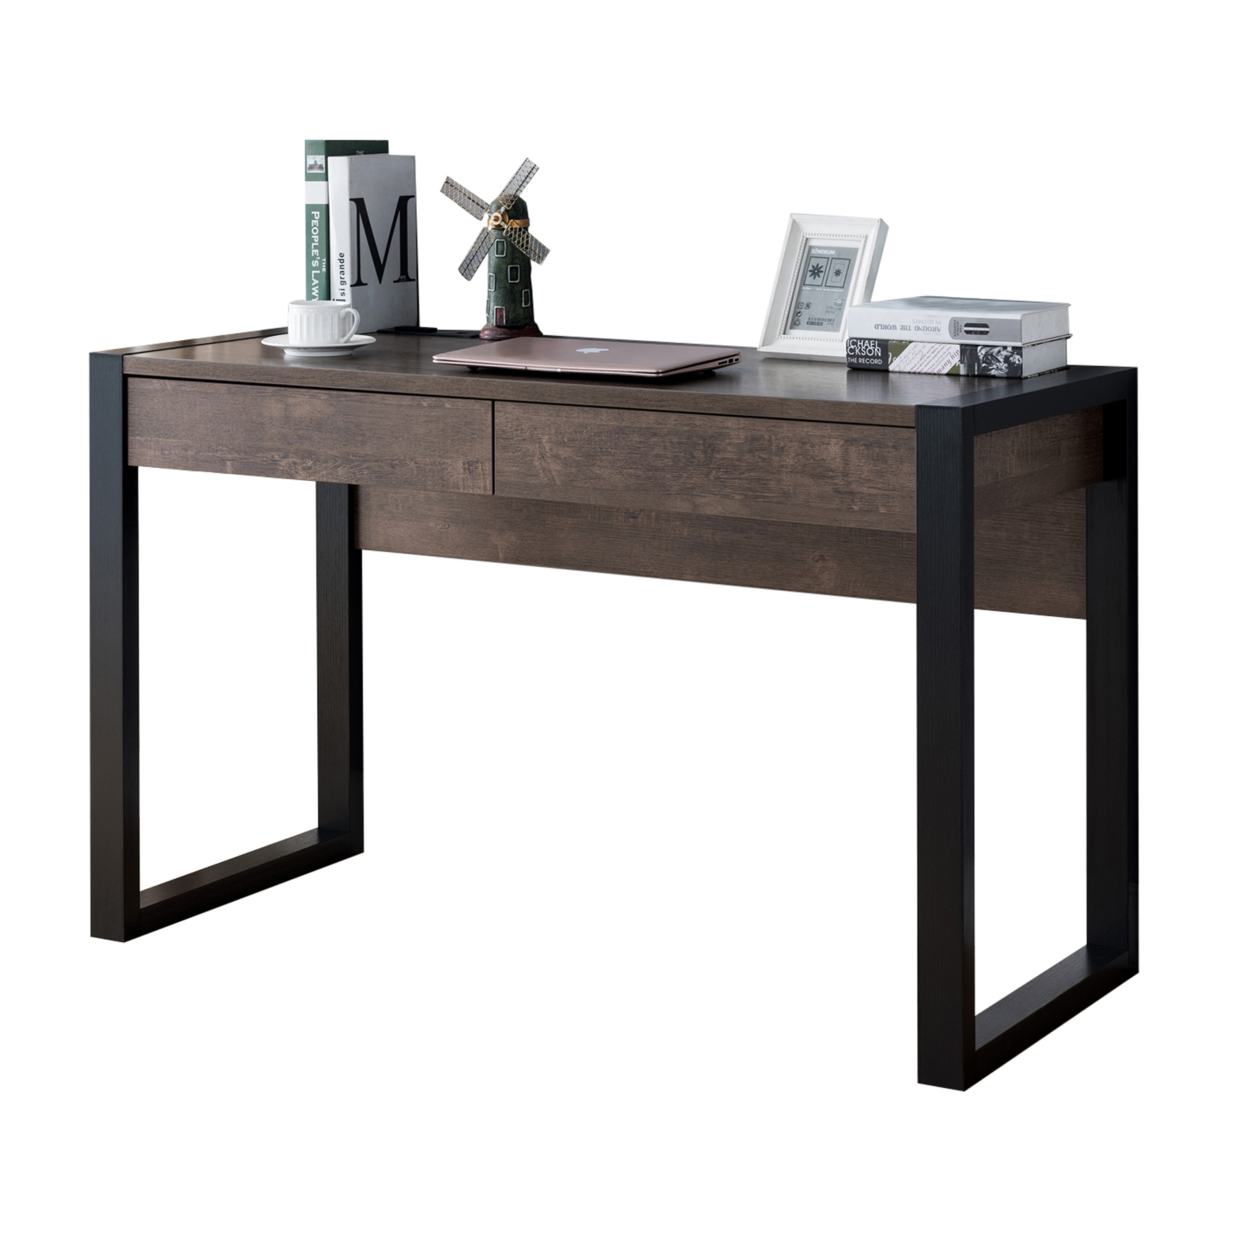 Rectangular Wooden Desk With Electric Outlet And Sled Leg Support, Black And Brown- Saltoro Sherpi